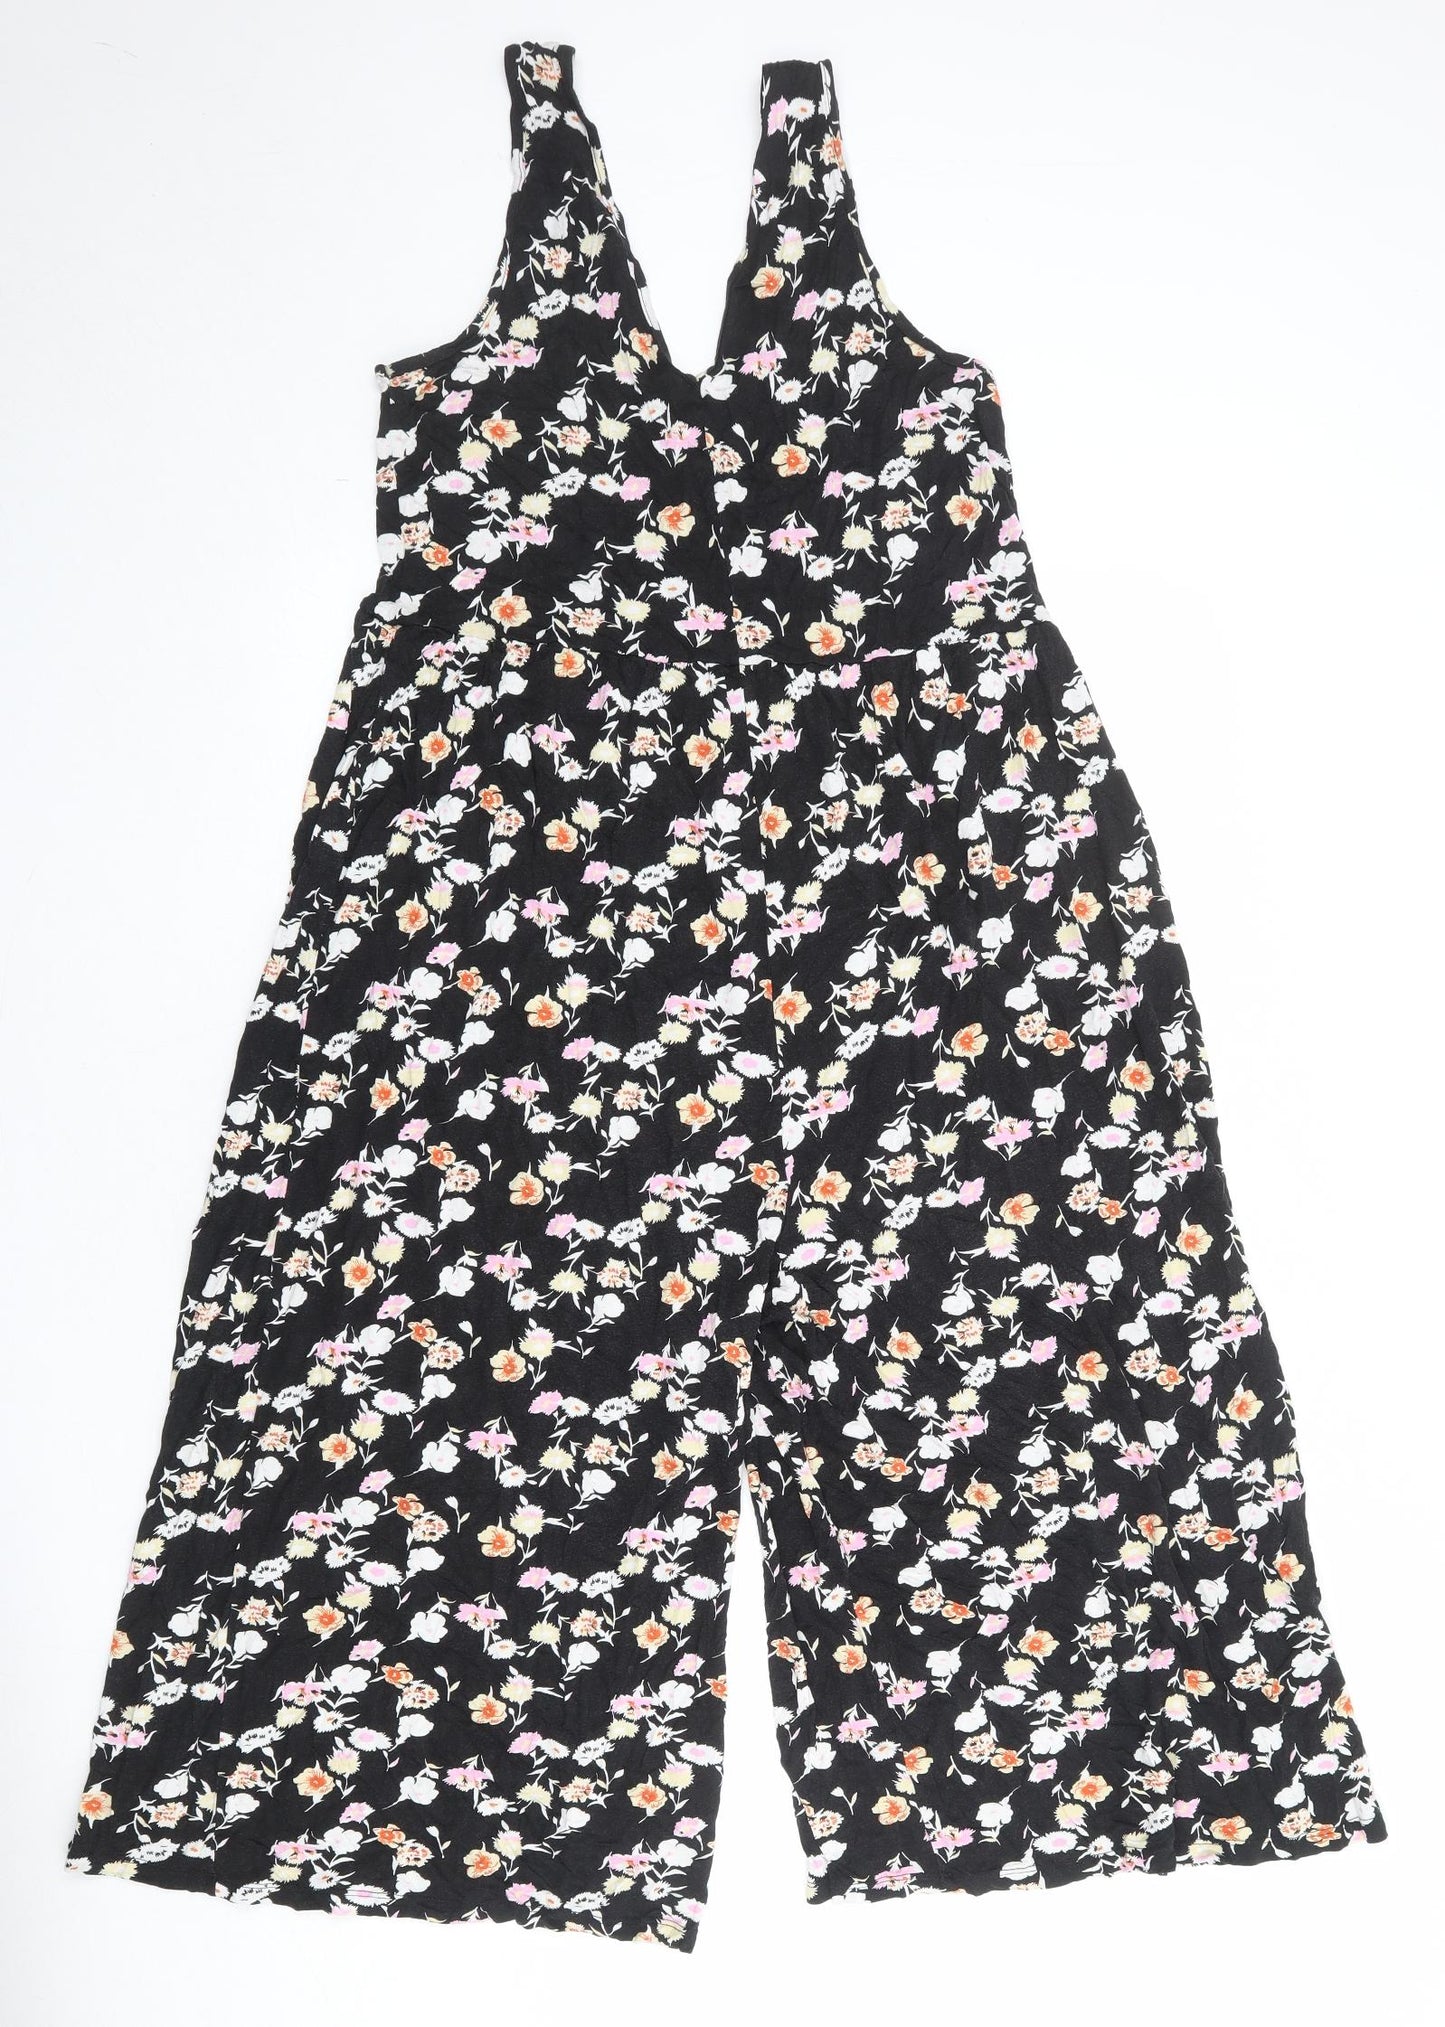 ASOS Womens Black Floral Polyester Jumpsuit One-Piece Size 10 Pullover